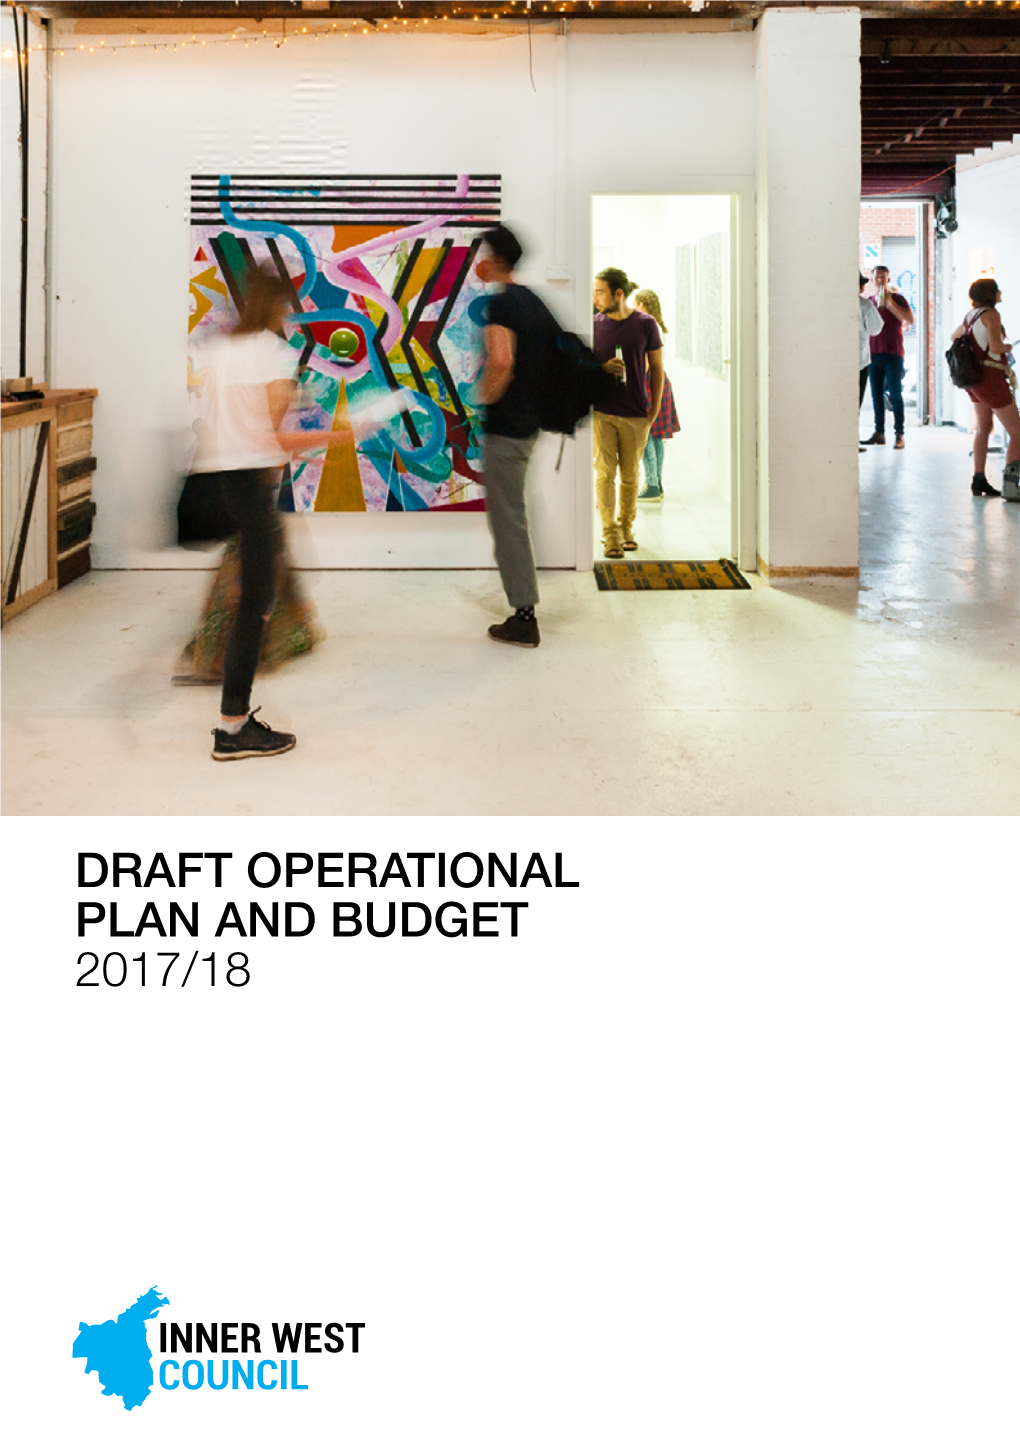 Draft Operational Plan and Budget 2017/18 Contents